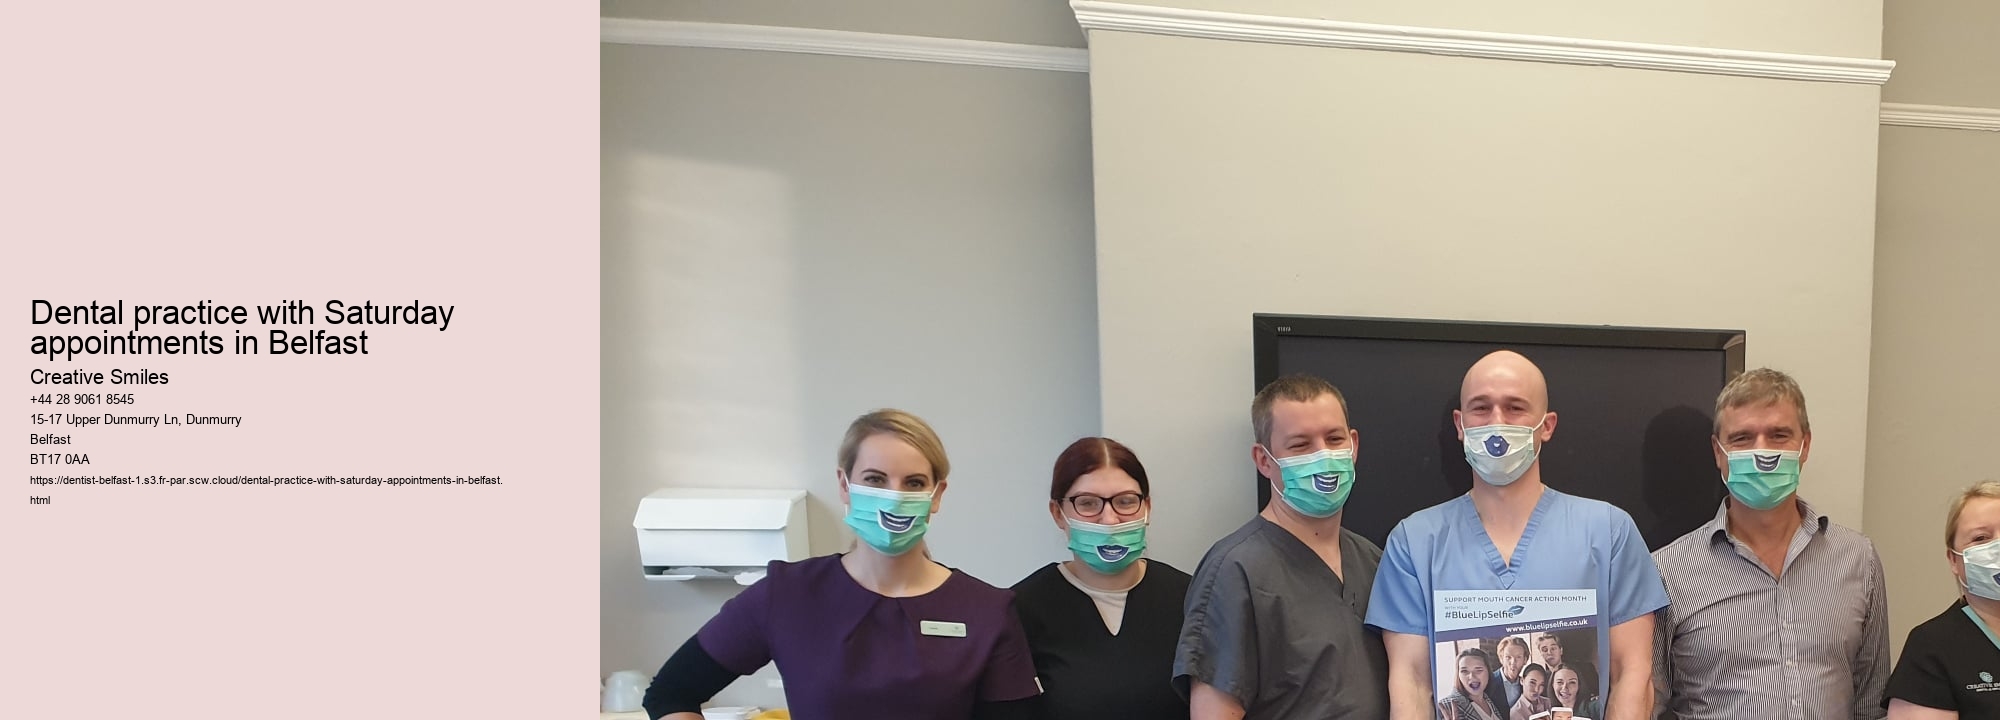 Dental practice with Saturday appointments in Belfast